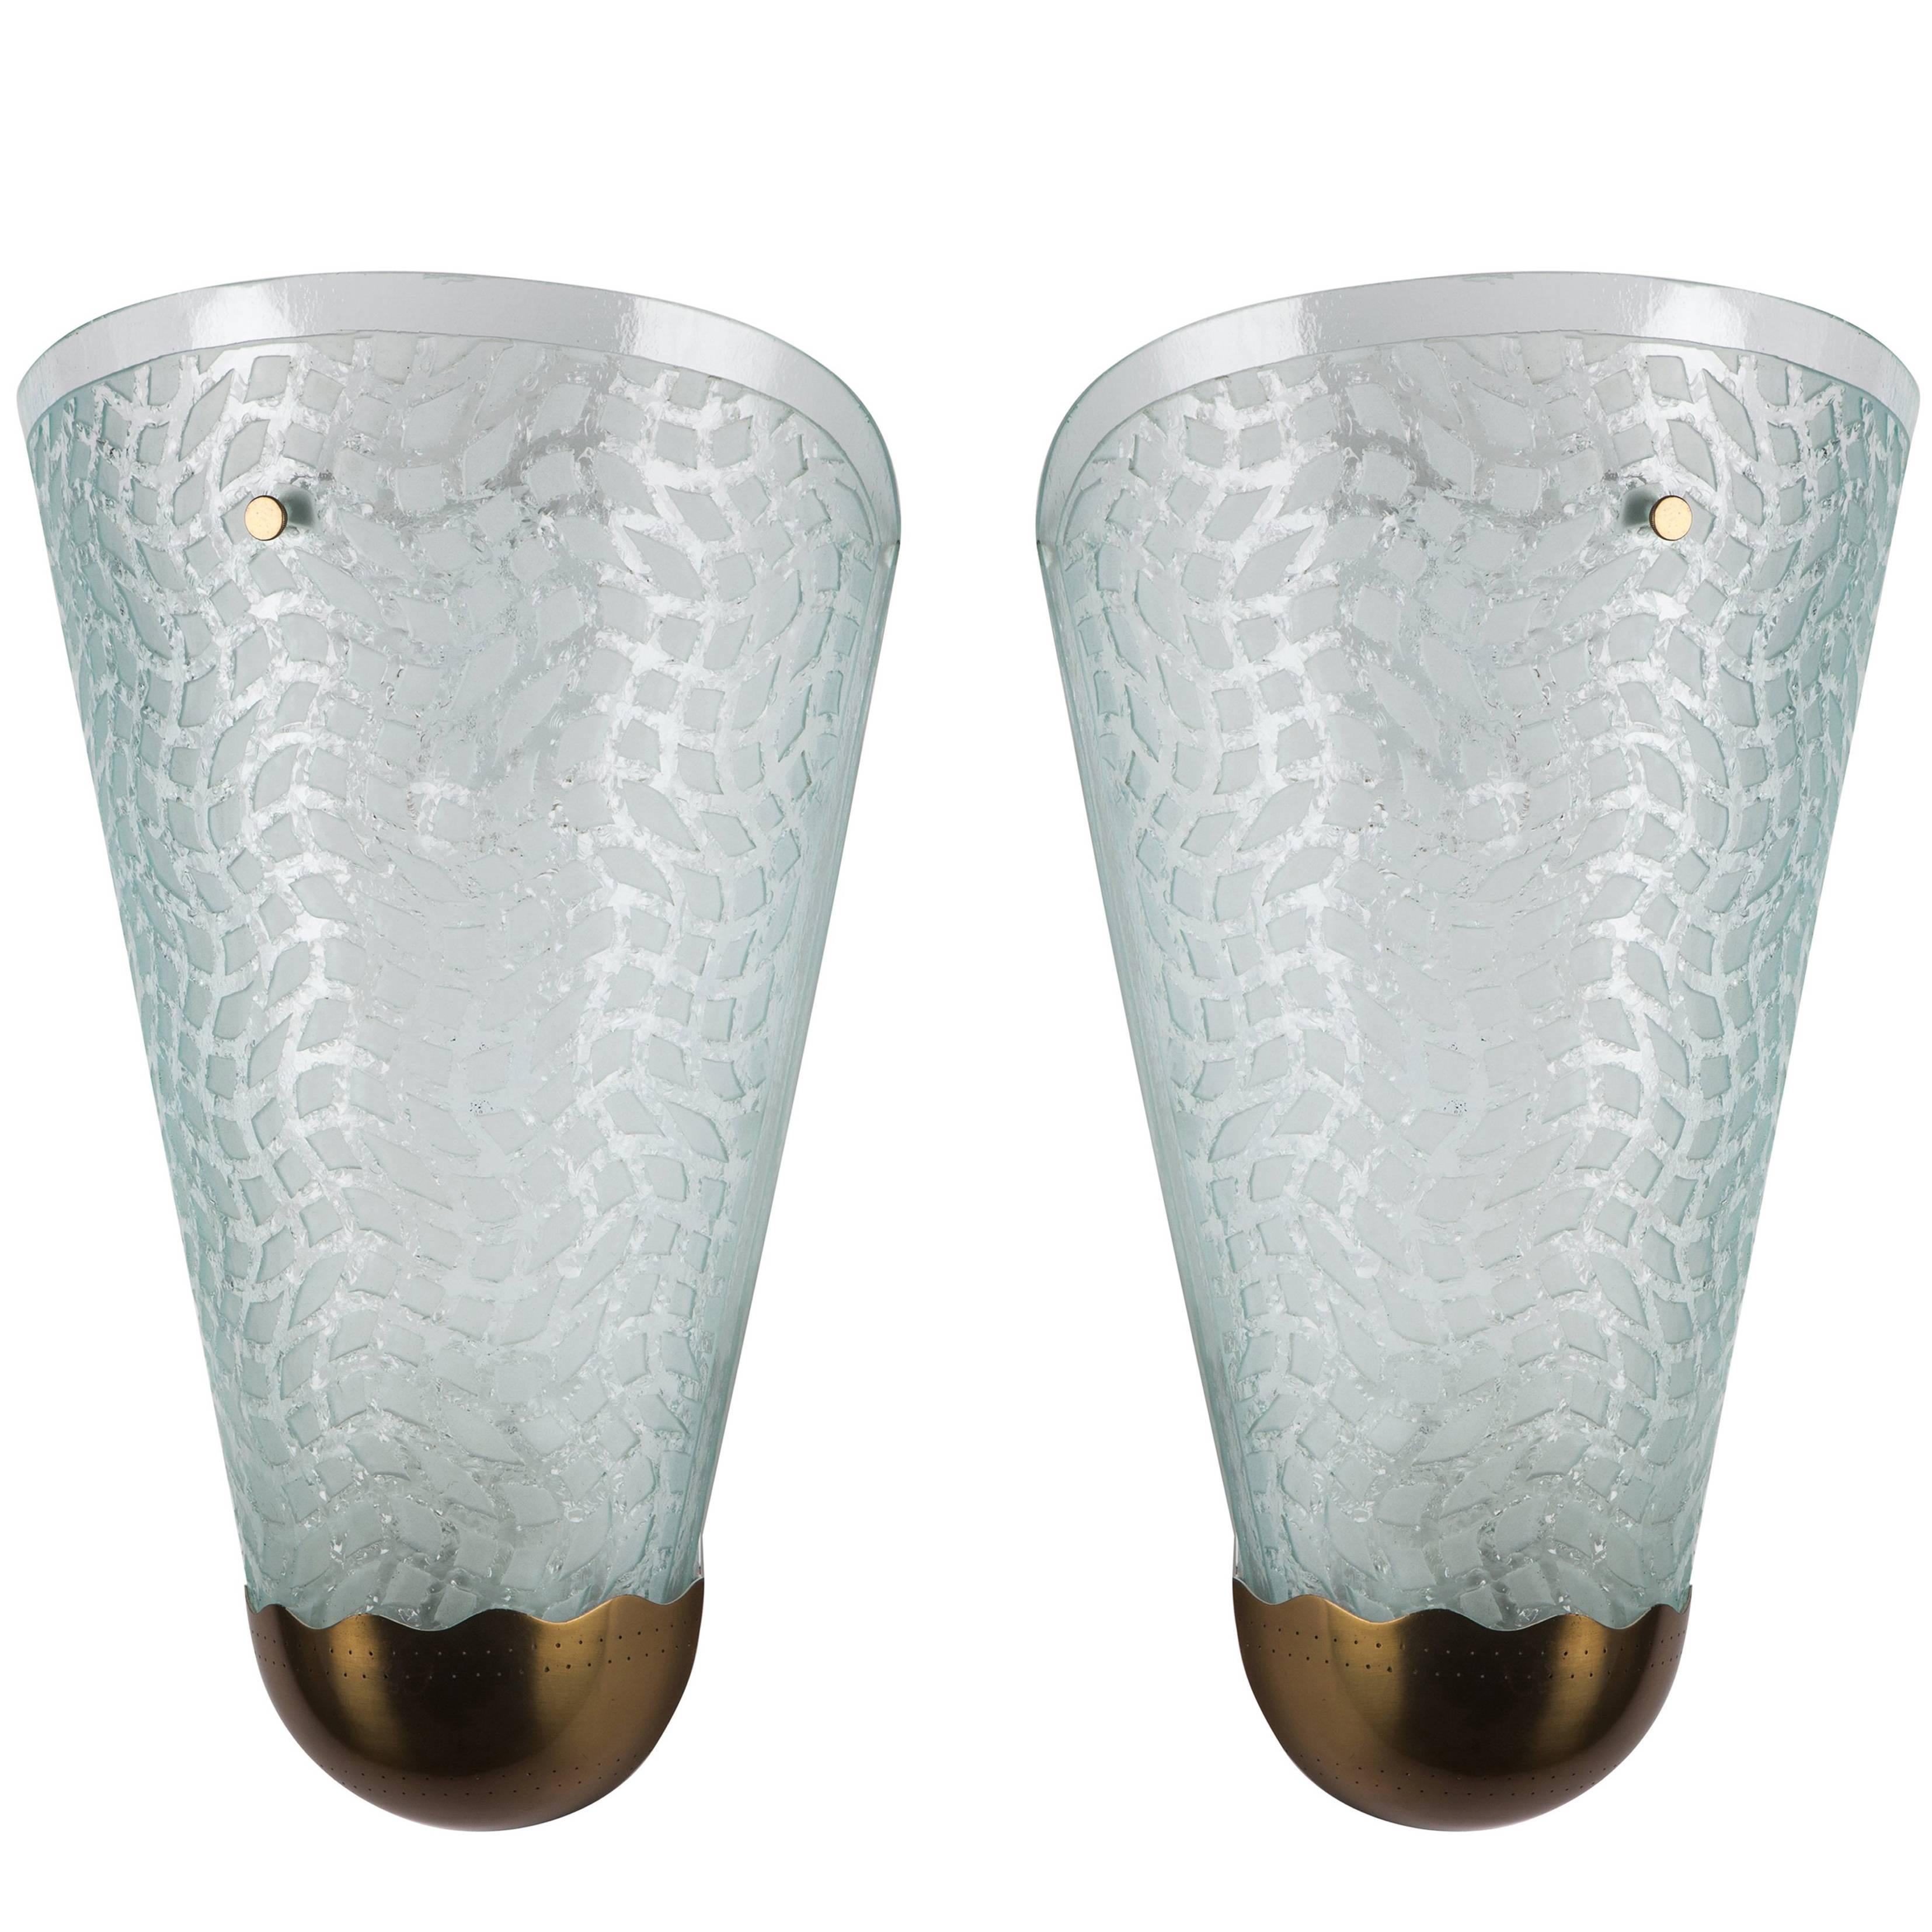 Etched and Textured Glass Sconces by Glossner, Swedish, circa 1940